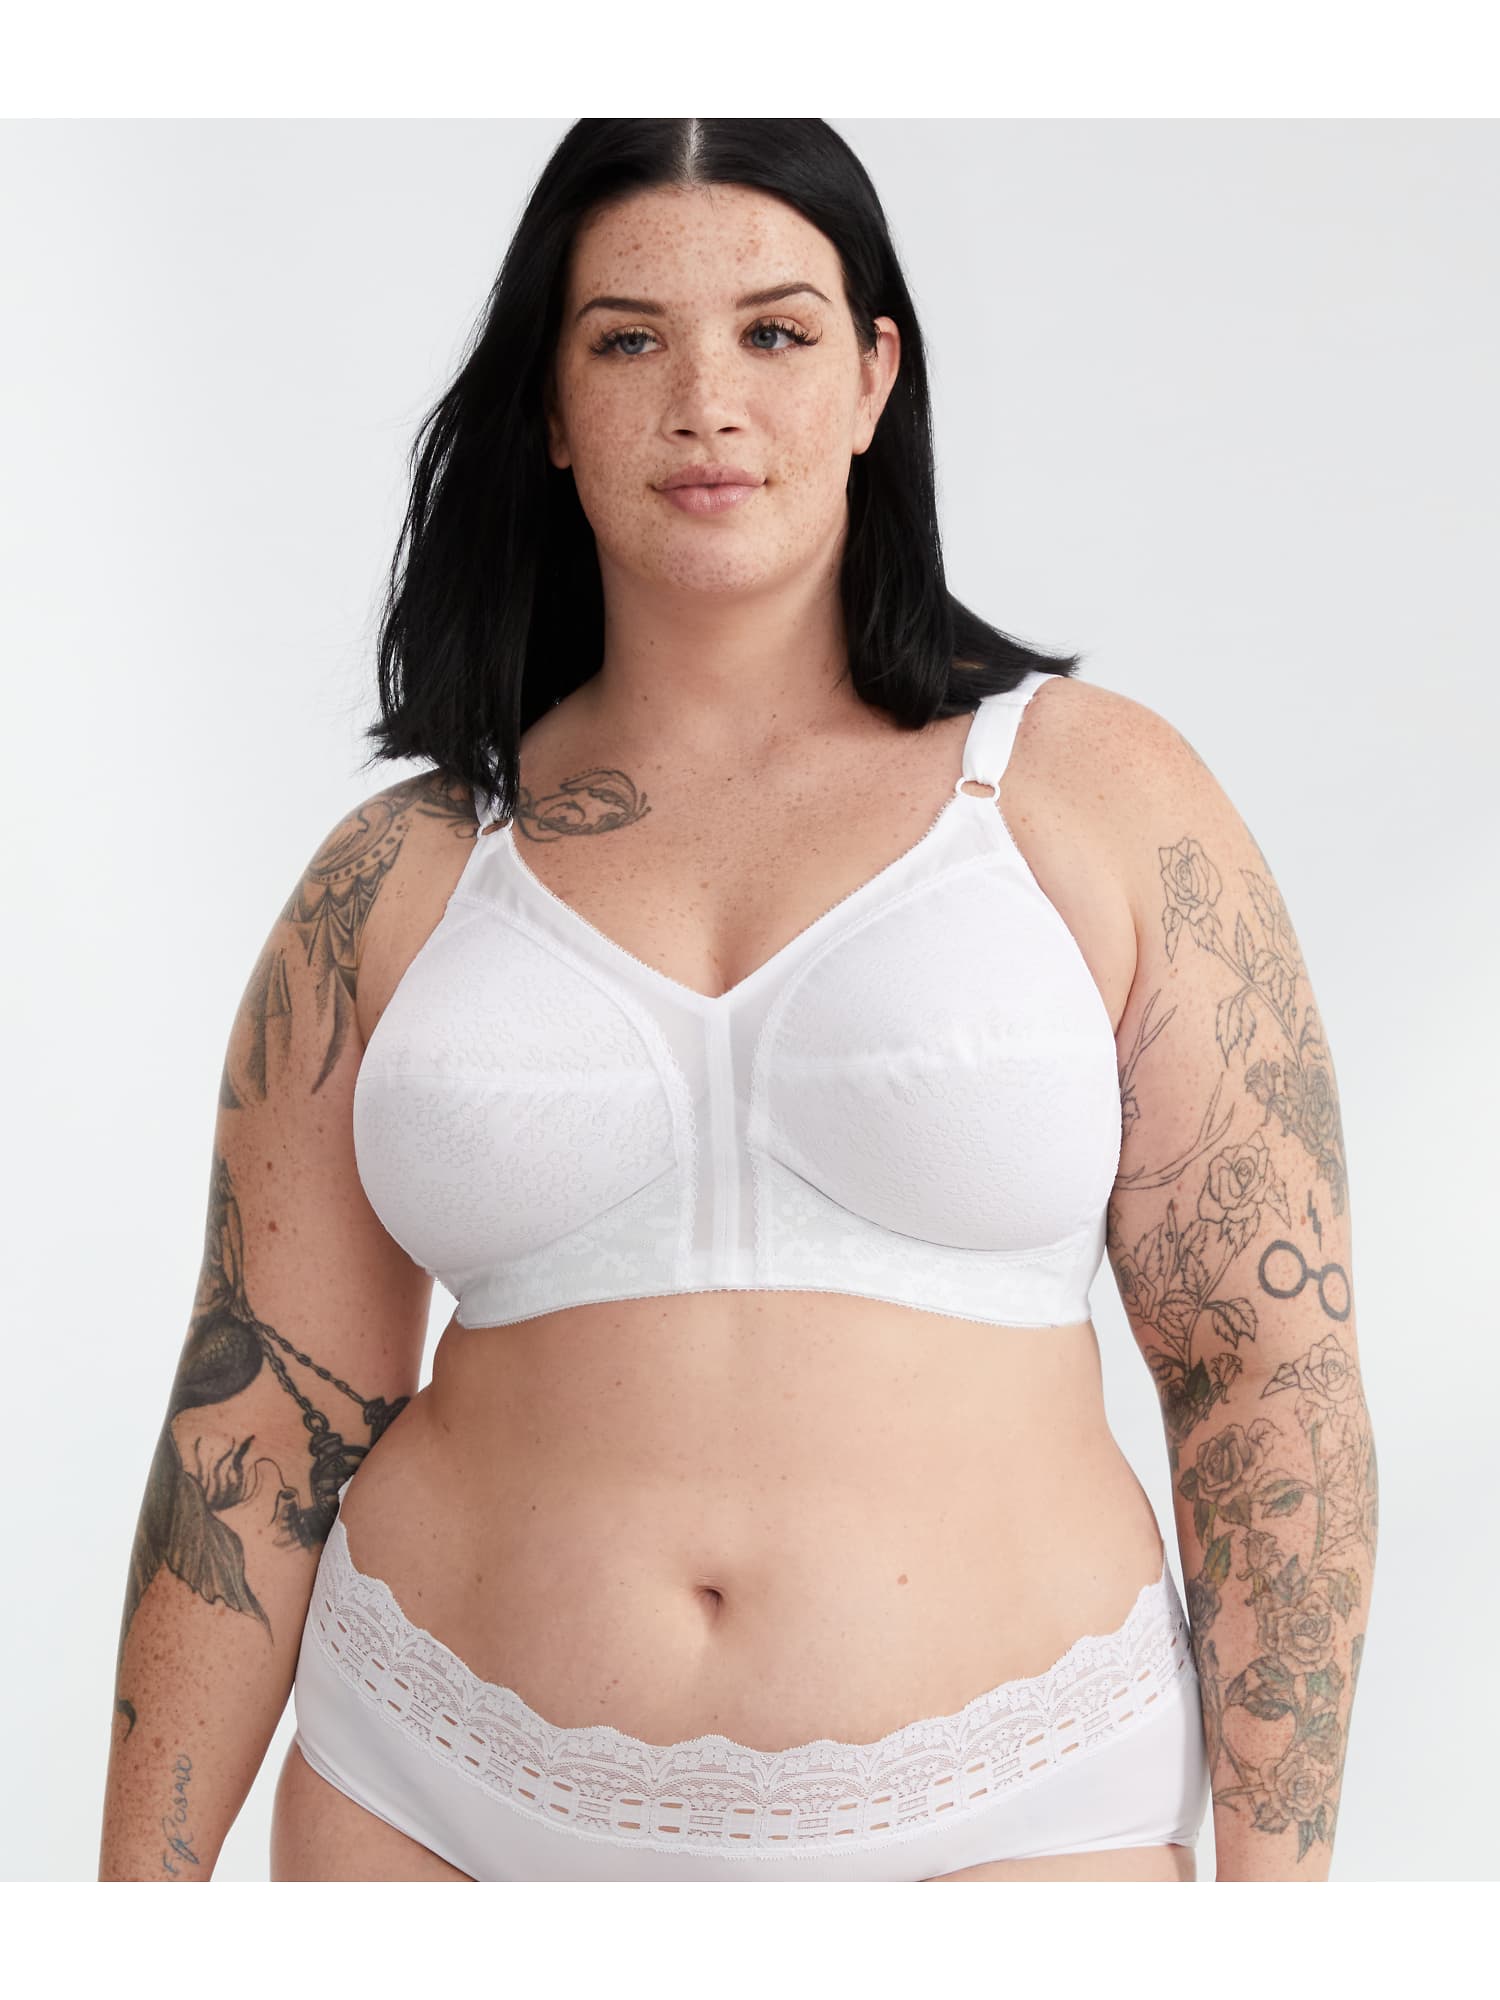 Playtex 38D 18 Hour Lace-Cup Wire-Free Bra White, 38 D - Walmart